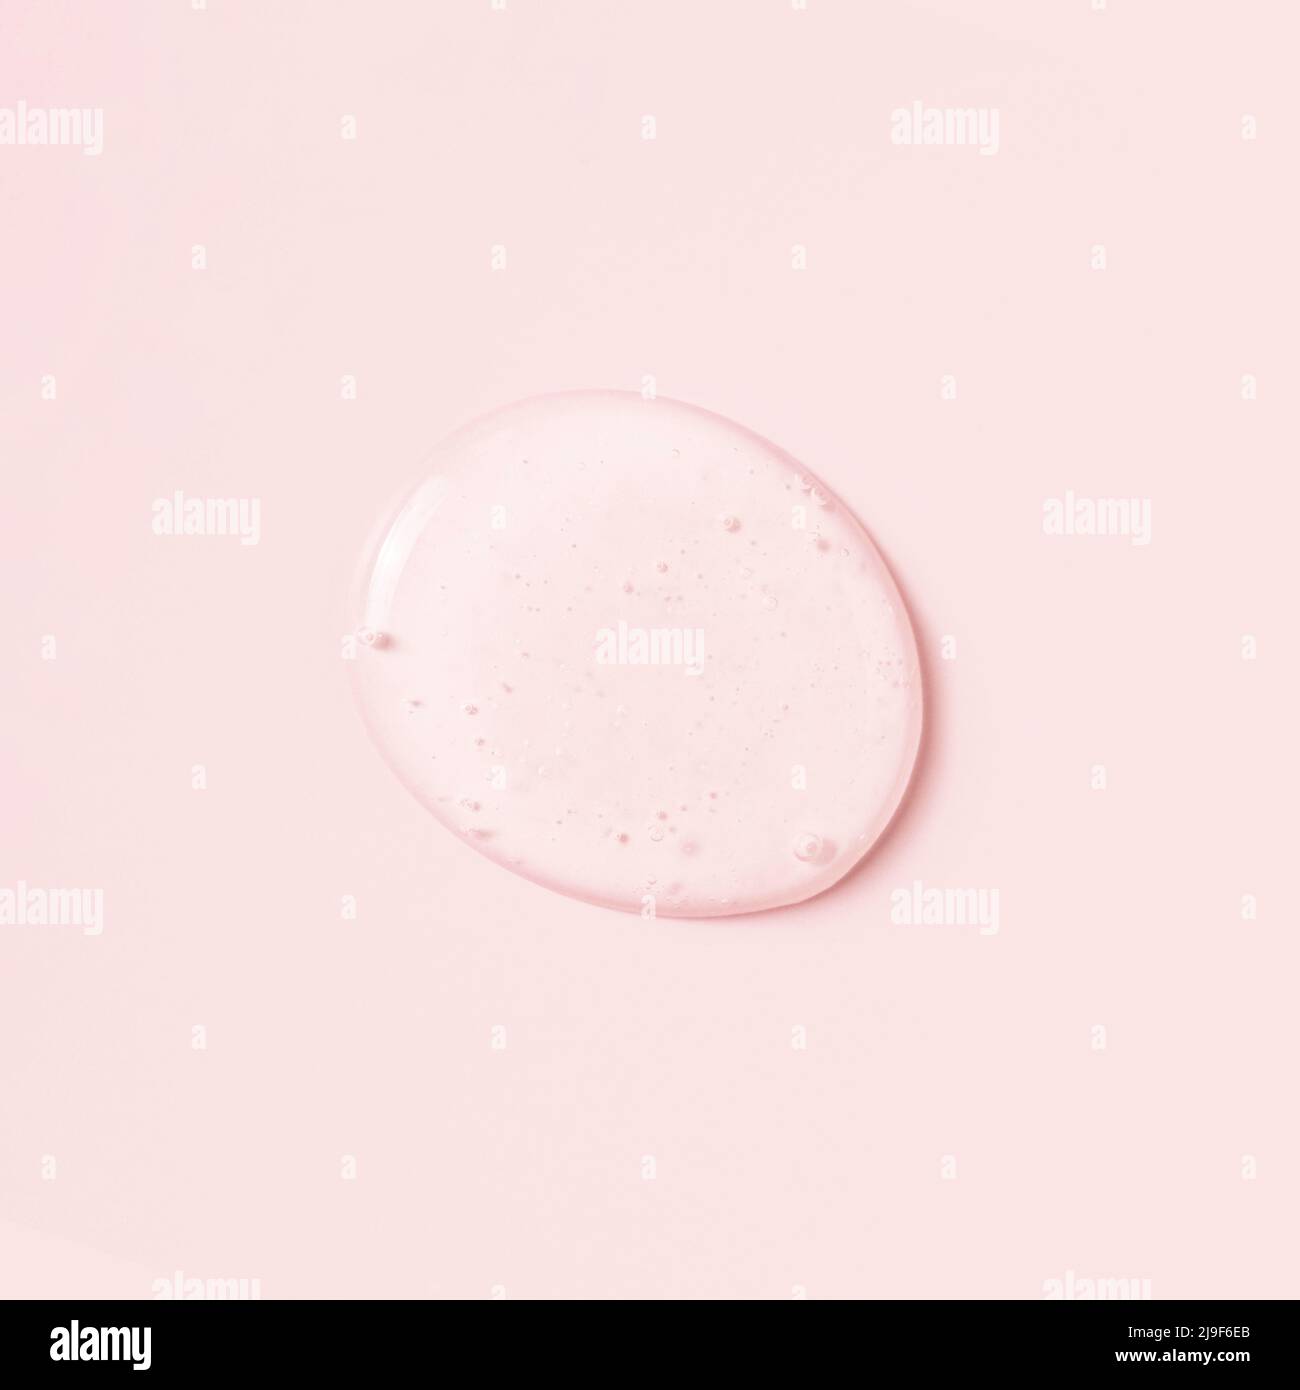 Drop of cosmetic liquid or gel on pink background. Stock Photo